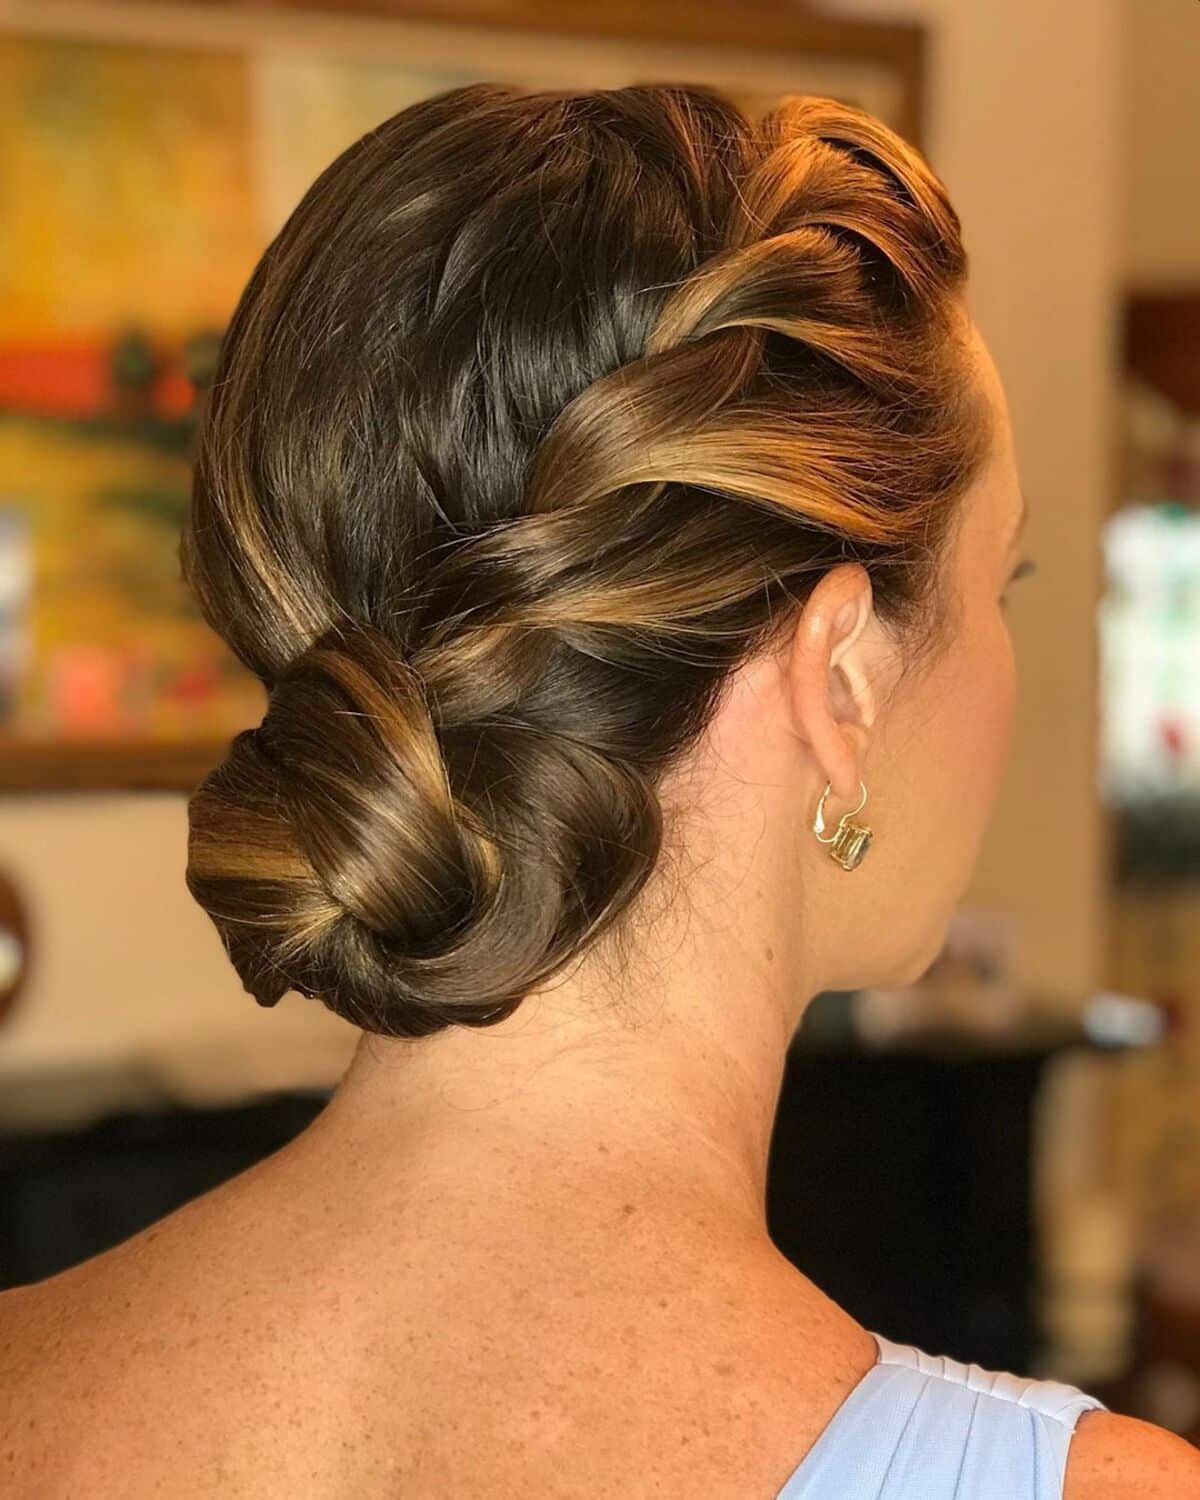 Adorable Side Braid with Bun Style